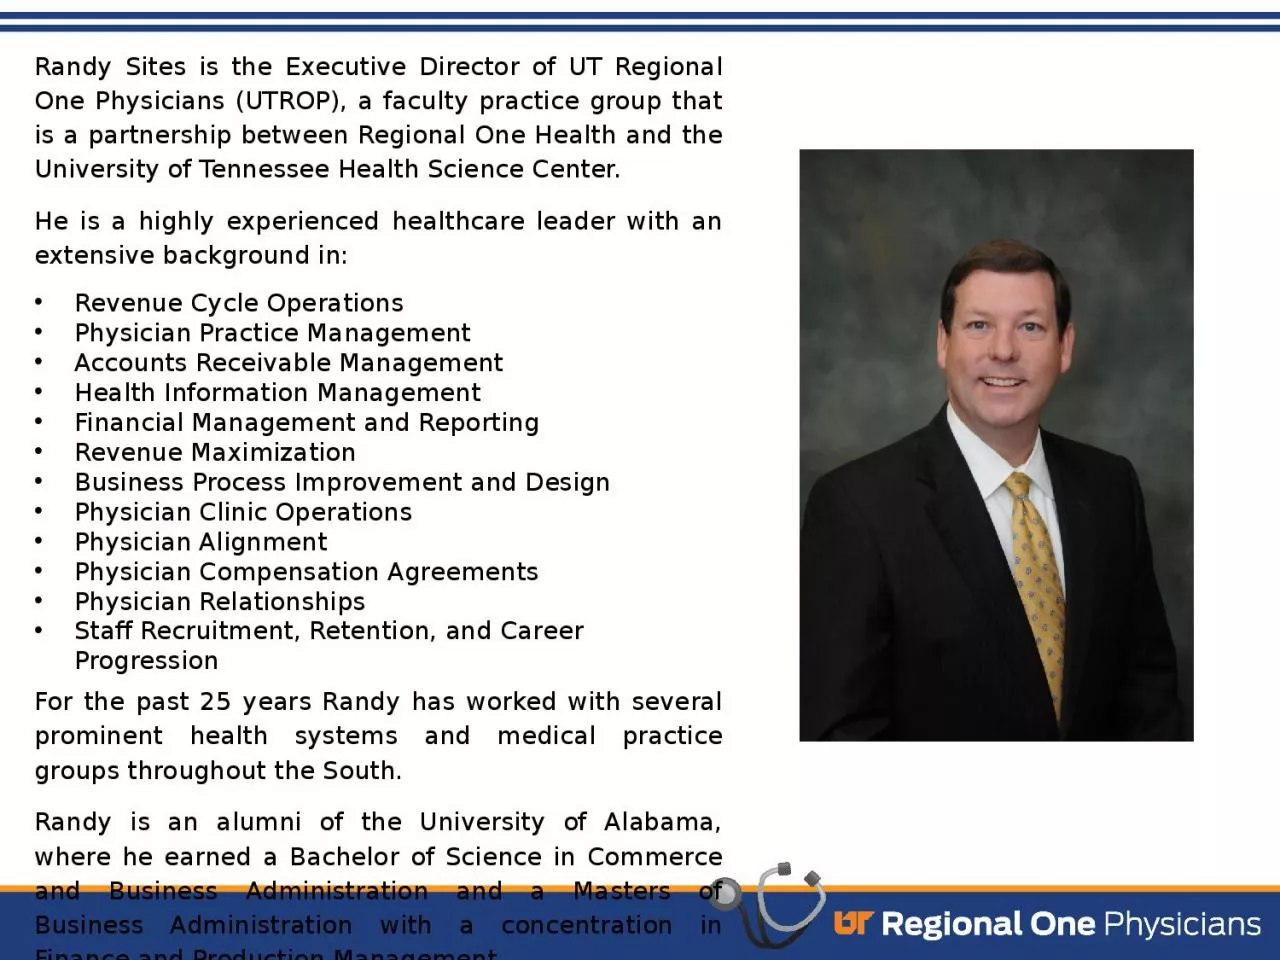 Randy Sites is the Executive Director of UT Regional One Physicians (UTROP), a faculty